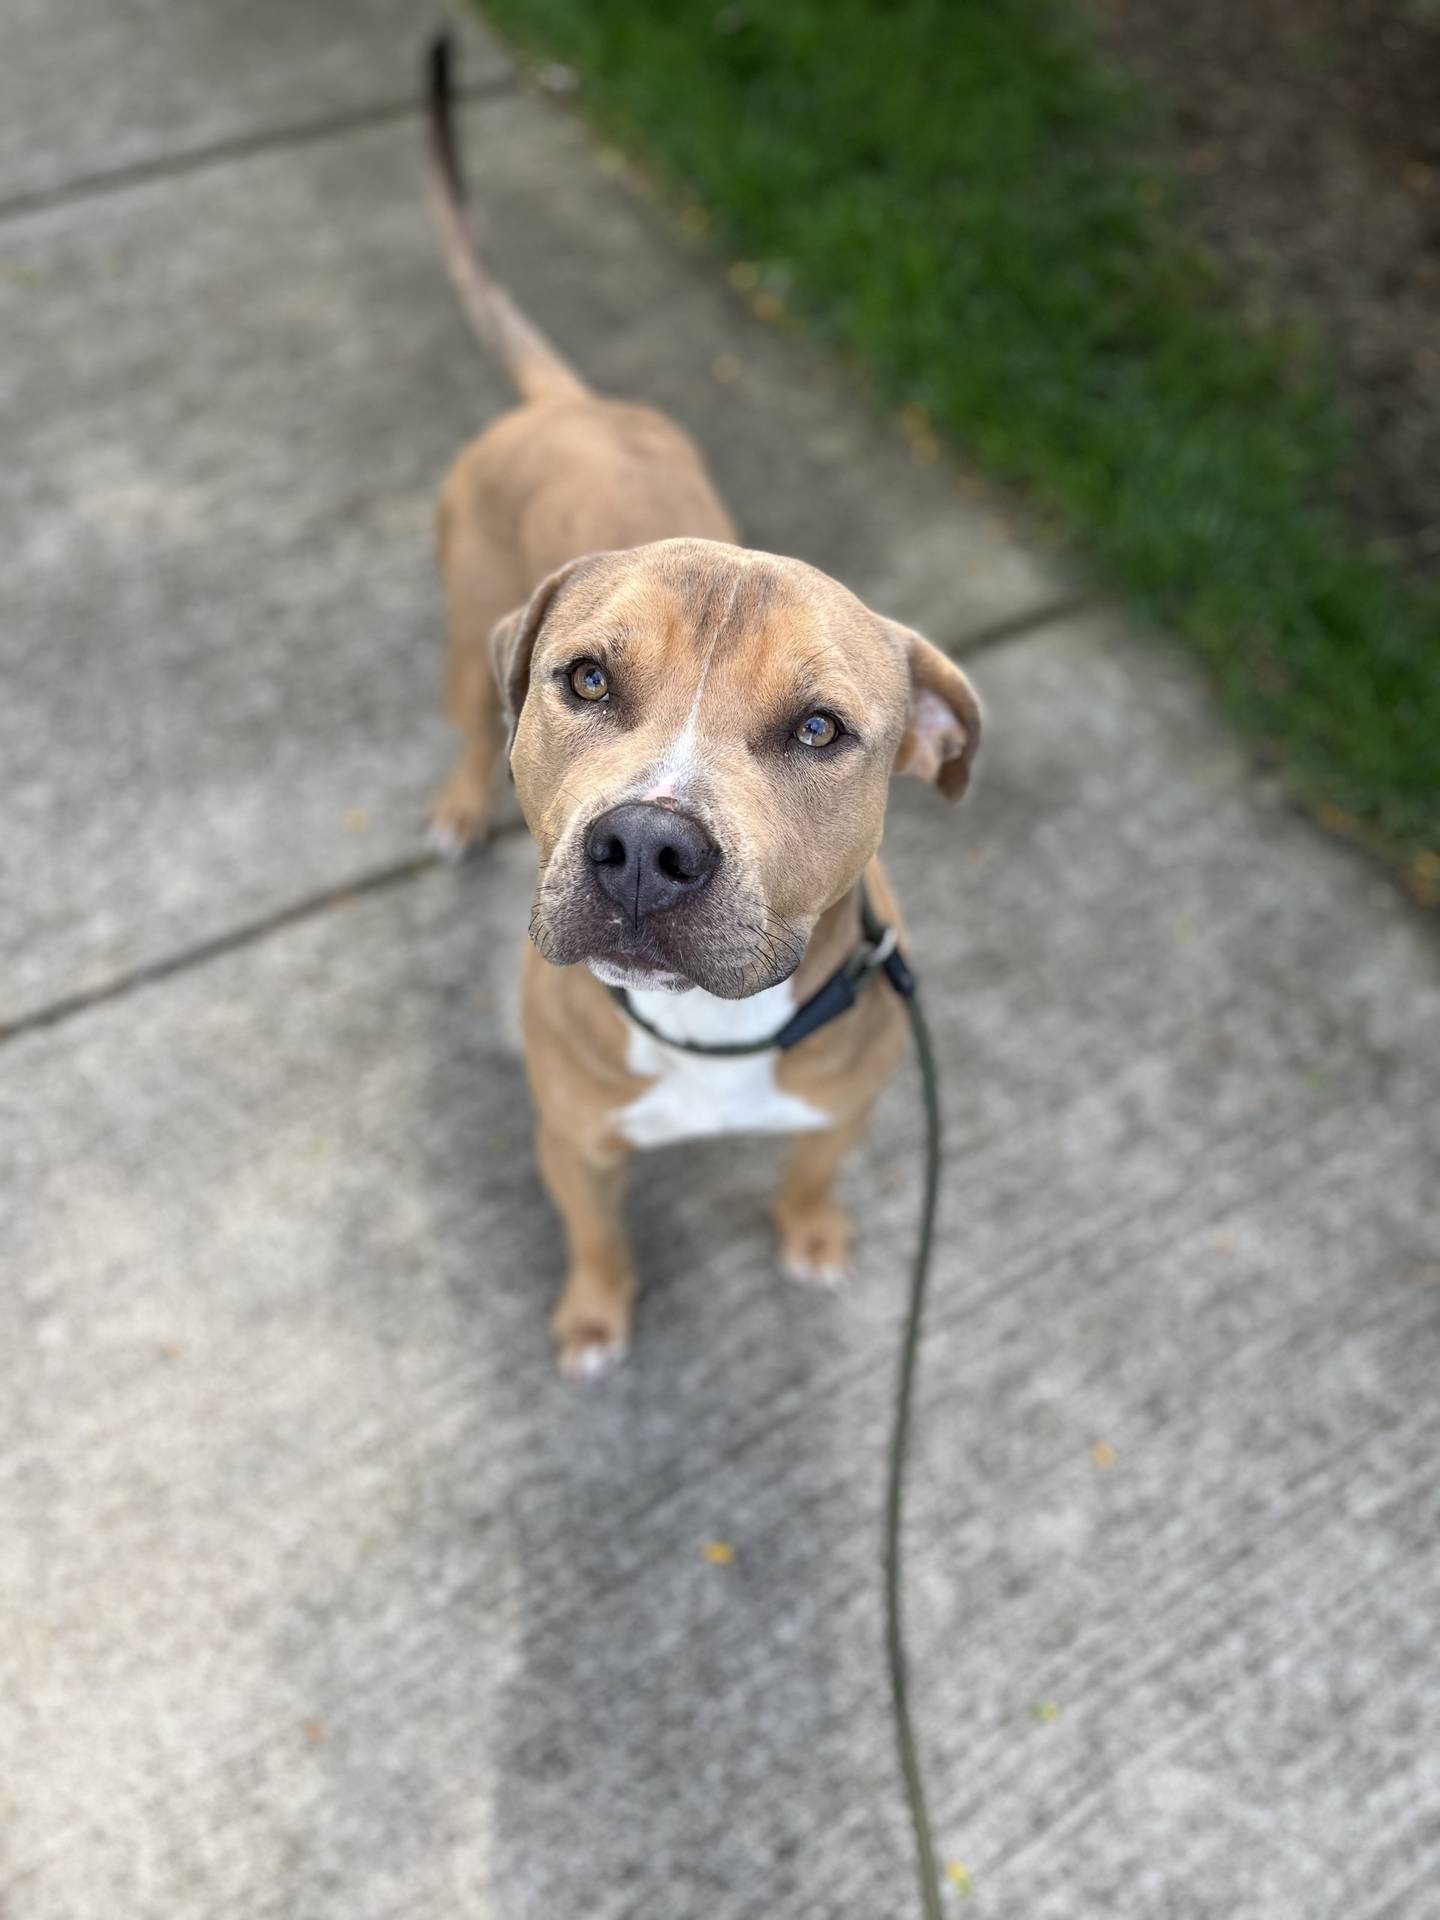 Three-year-old Roman is sweet, well-behaved, friendly and quiet. He love adventures and walks nicely on a leash. He seems to like everyone he meets and is good with other dogs. To meet Roman, email Dogadoption@nawsus.org. Visit nawsus.org.